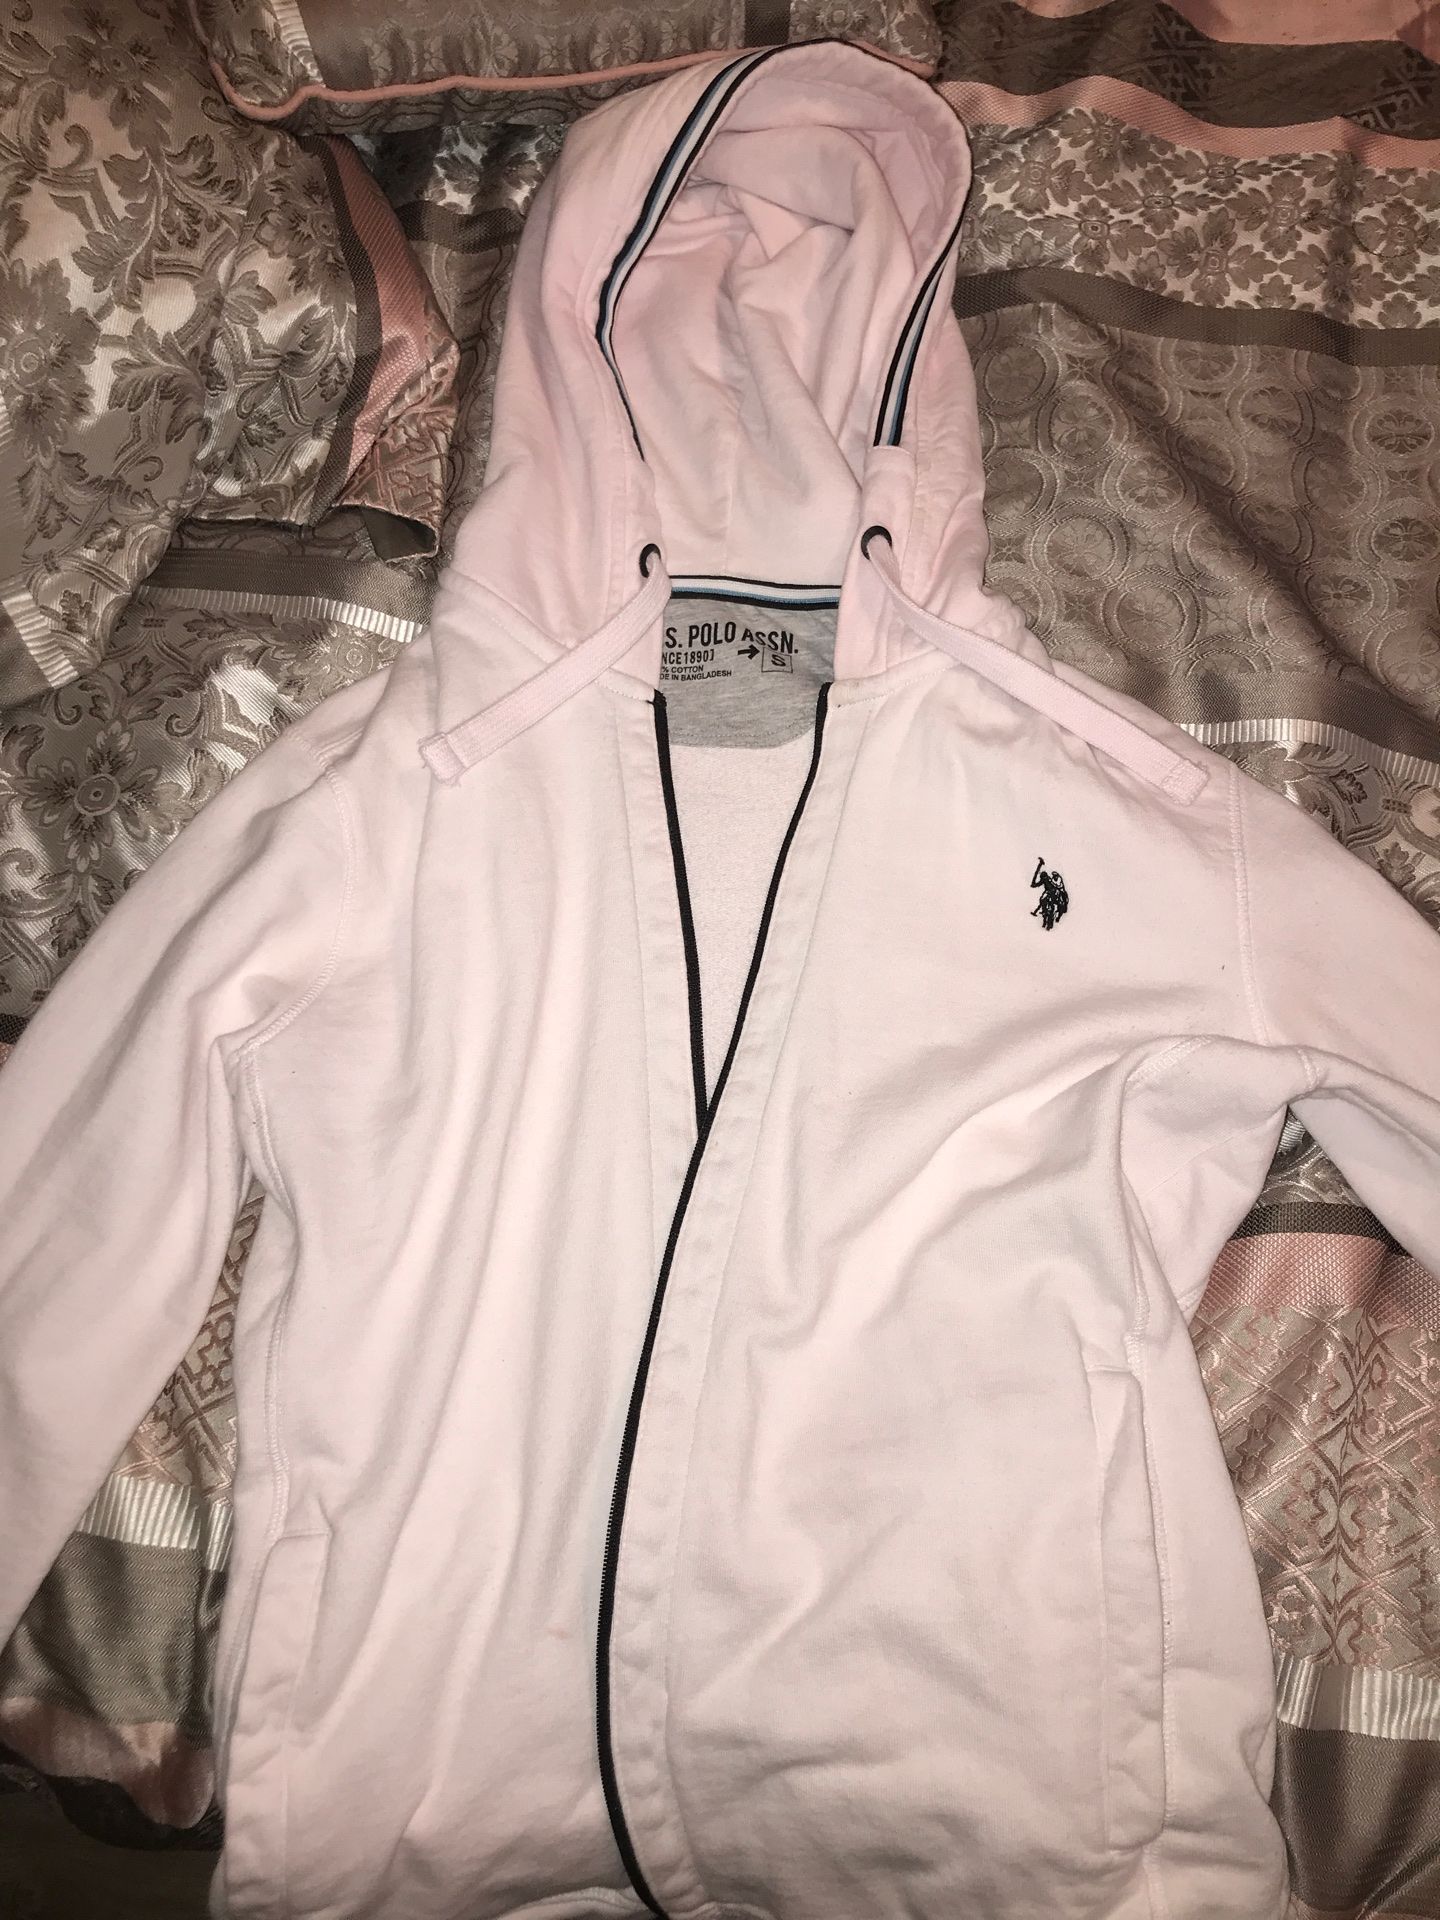 Very light pink U.S polo hoodie size small could fit medium